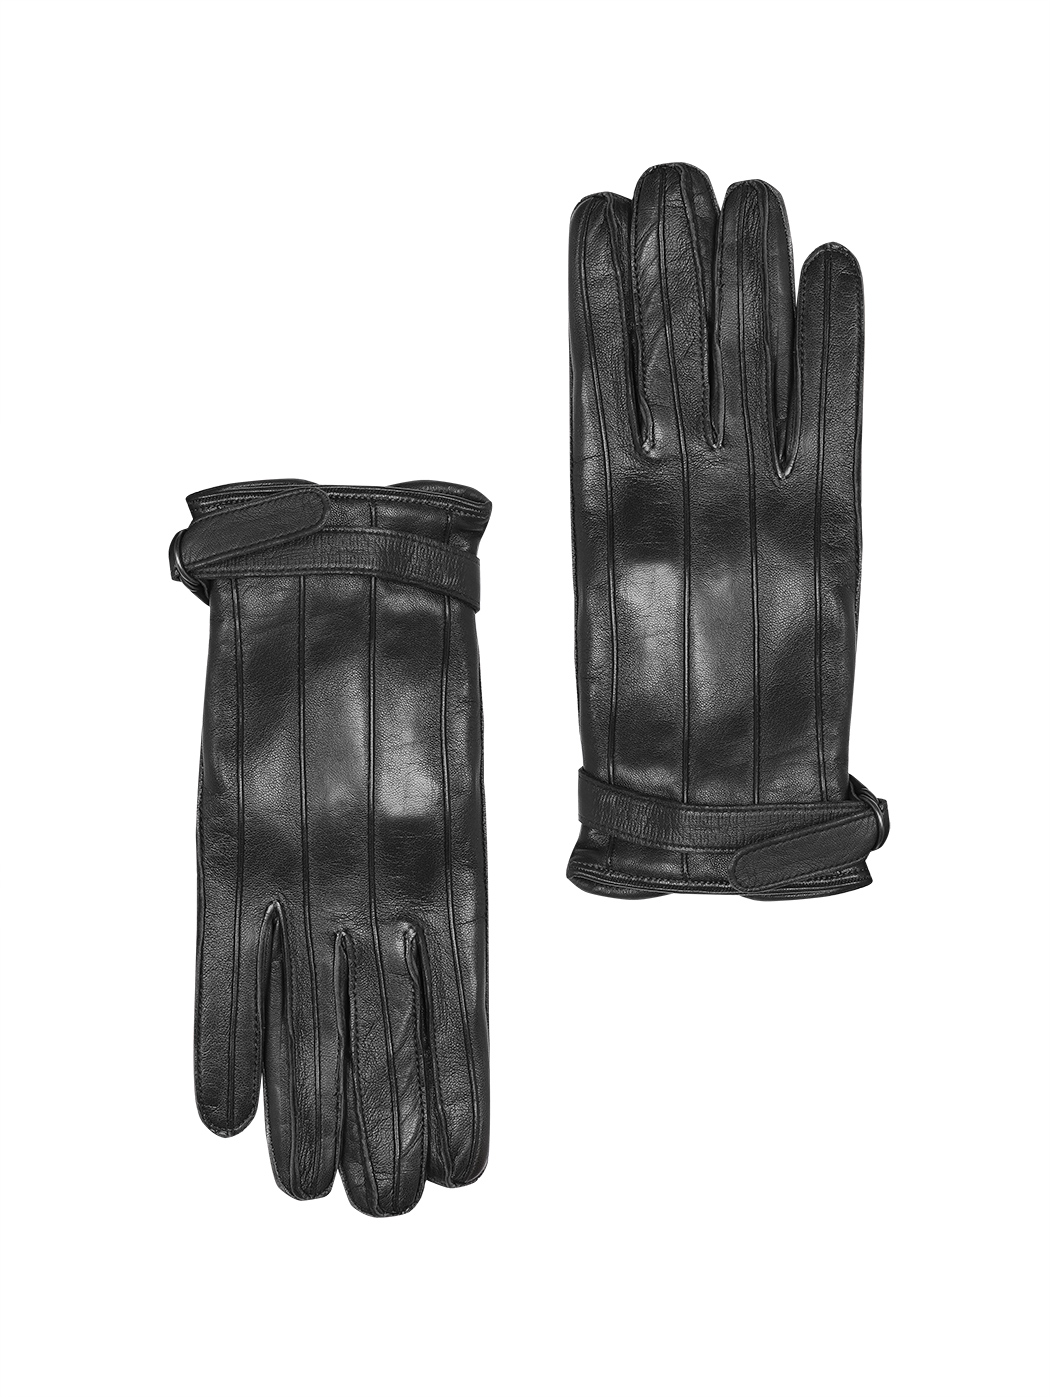 Men's Gloves in Leather and Cashmere Black